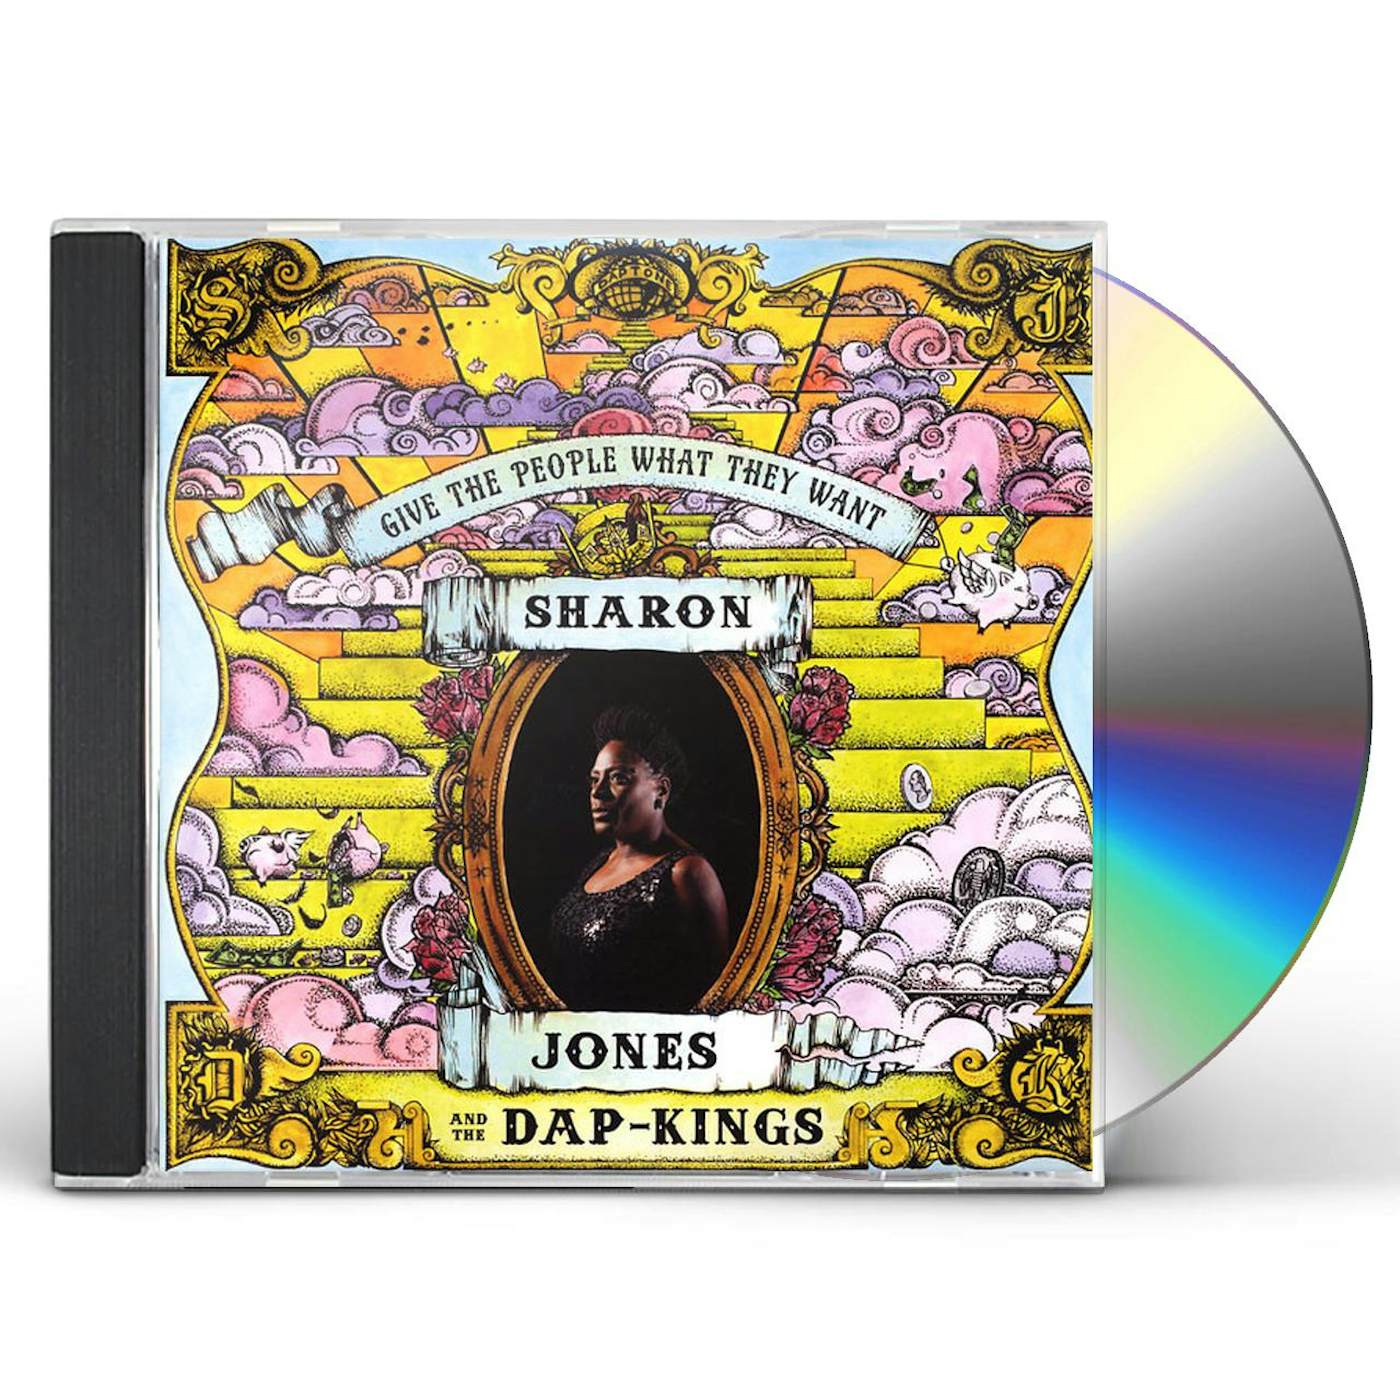 Sharon Jones GIVE THE PEOPLE WHAT THEY WANT CD